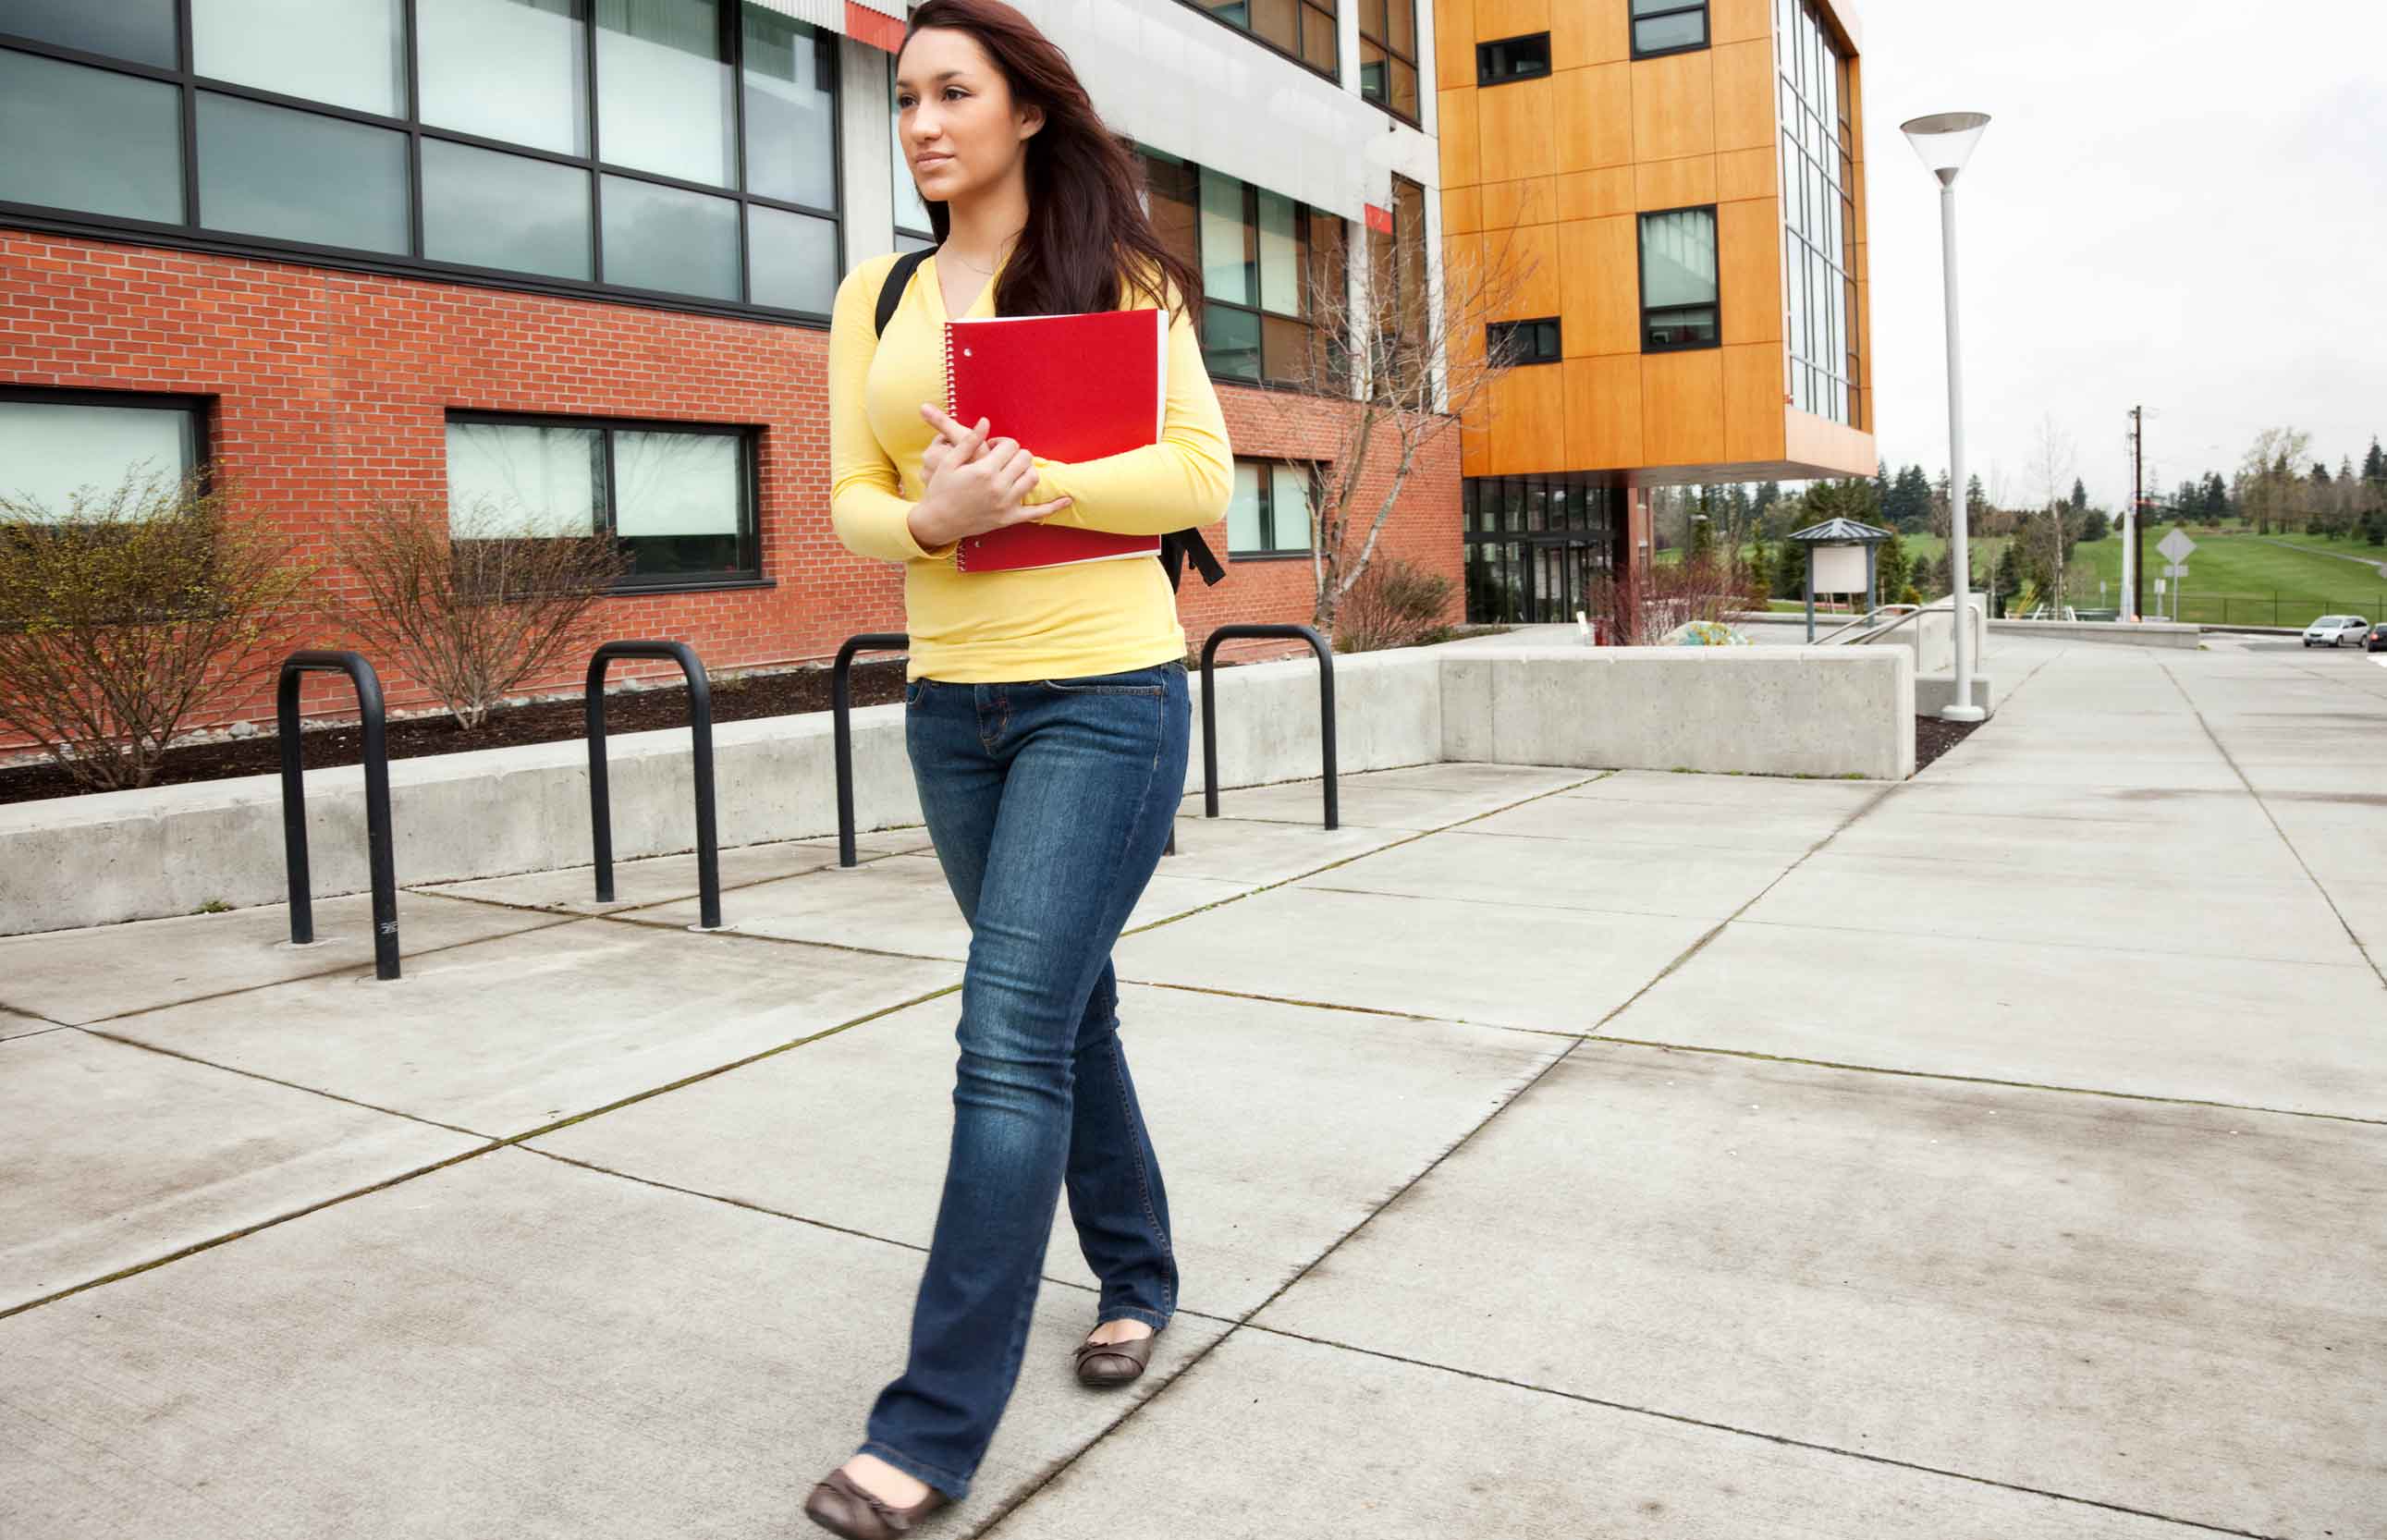 Here's why students should seriously consider spending the first two years of their undergraduate career in community college.